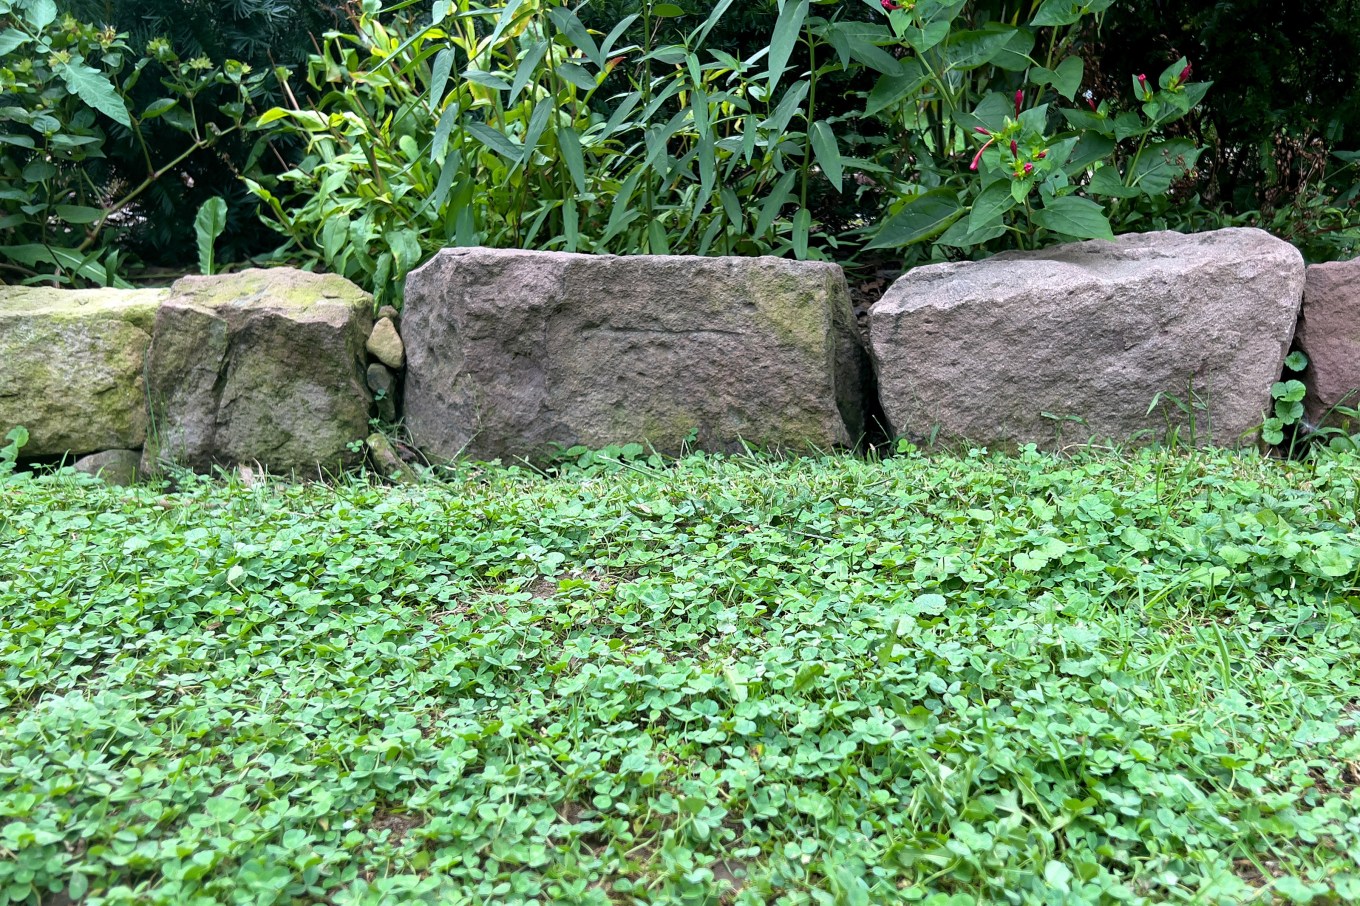 A luscious clover lawn with rocks and other foliage around it.